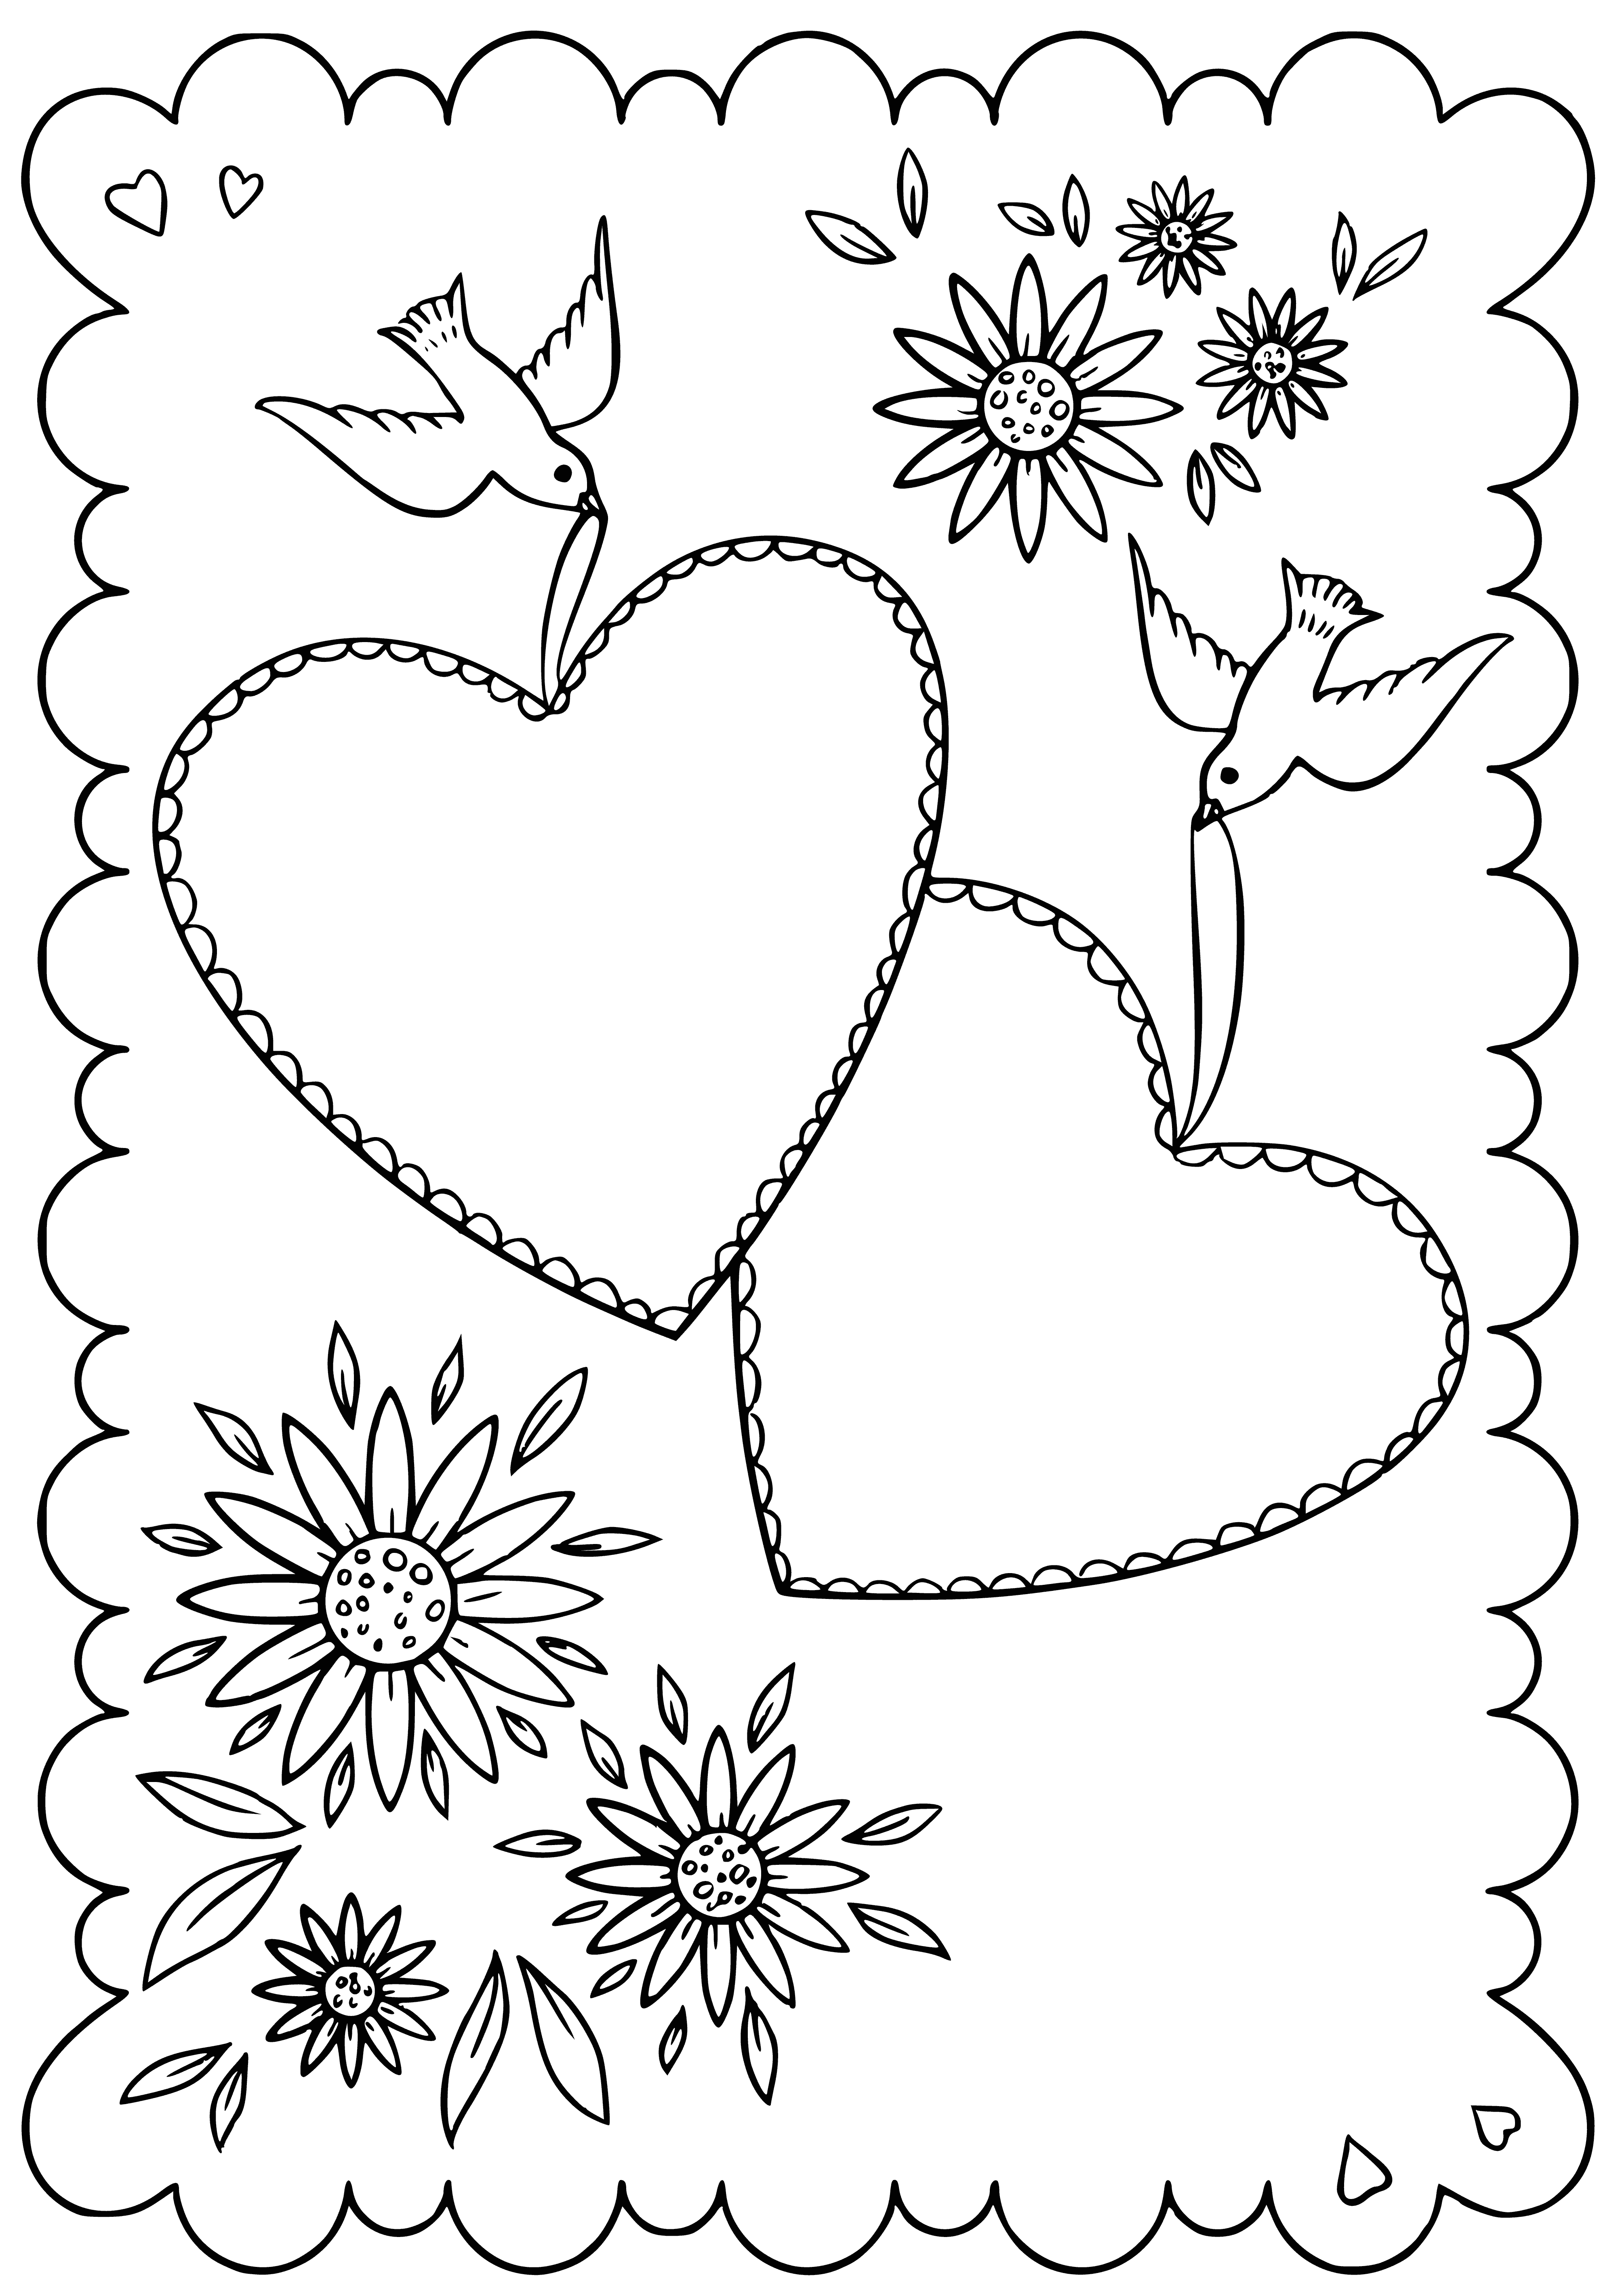 coloring page: Hearts around a pink background show a heart with an arrow and "Be Mine" in the center. #ValentinesDay